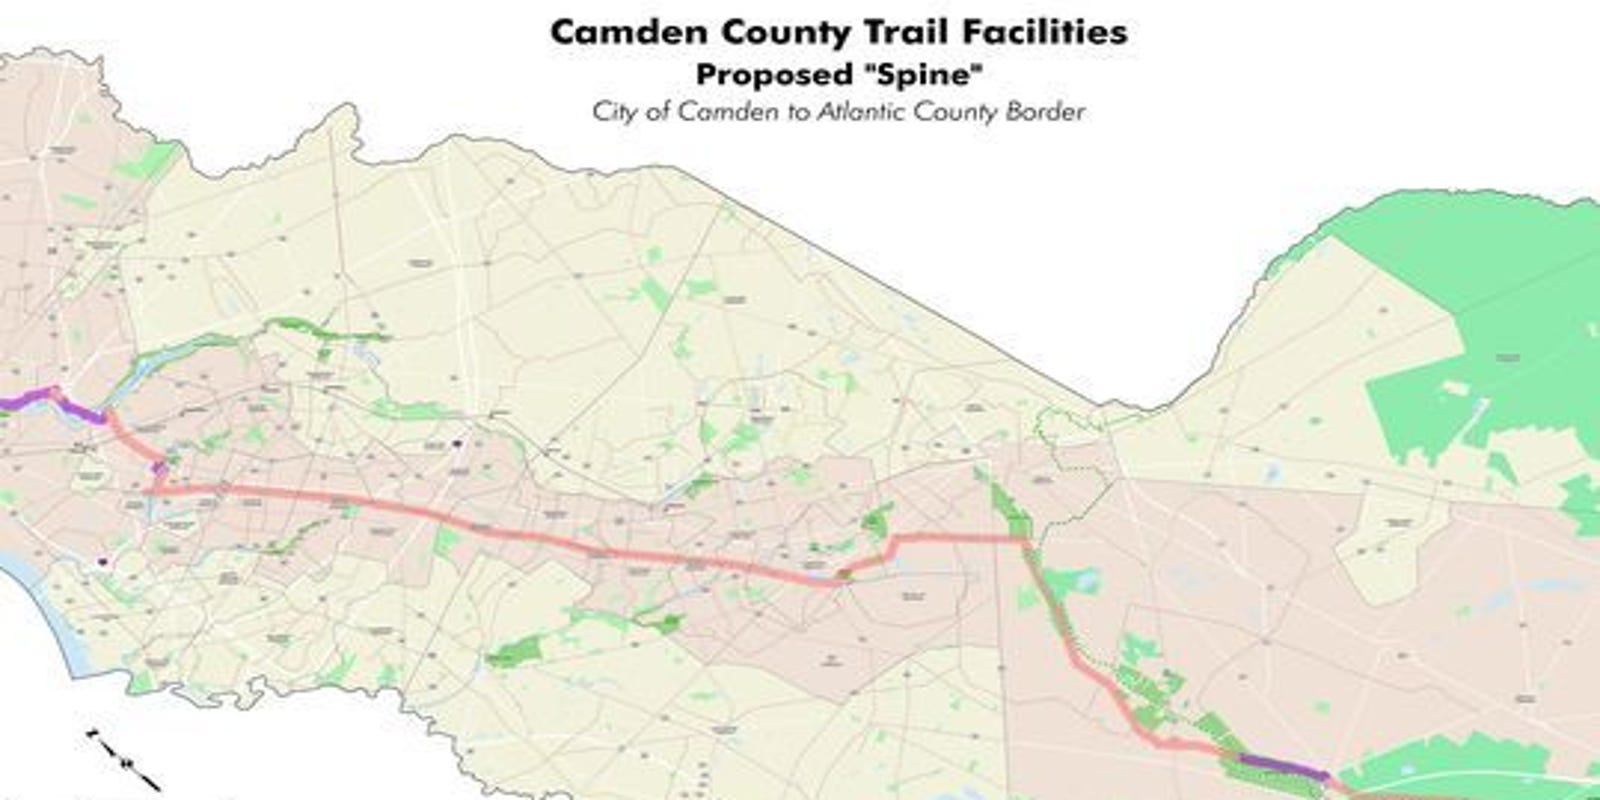 Camden County officials seek public input on 33 mile trail system